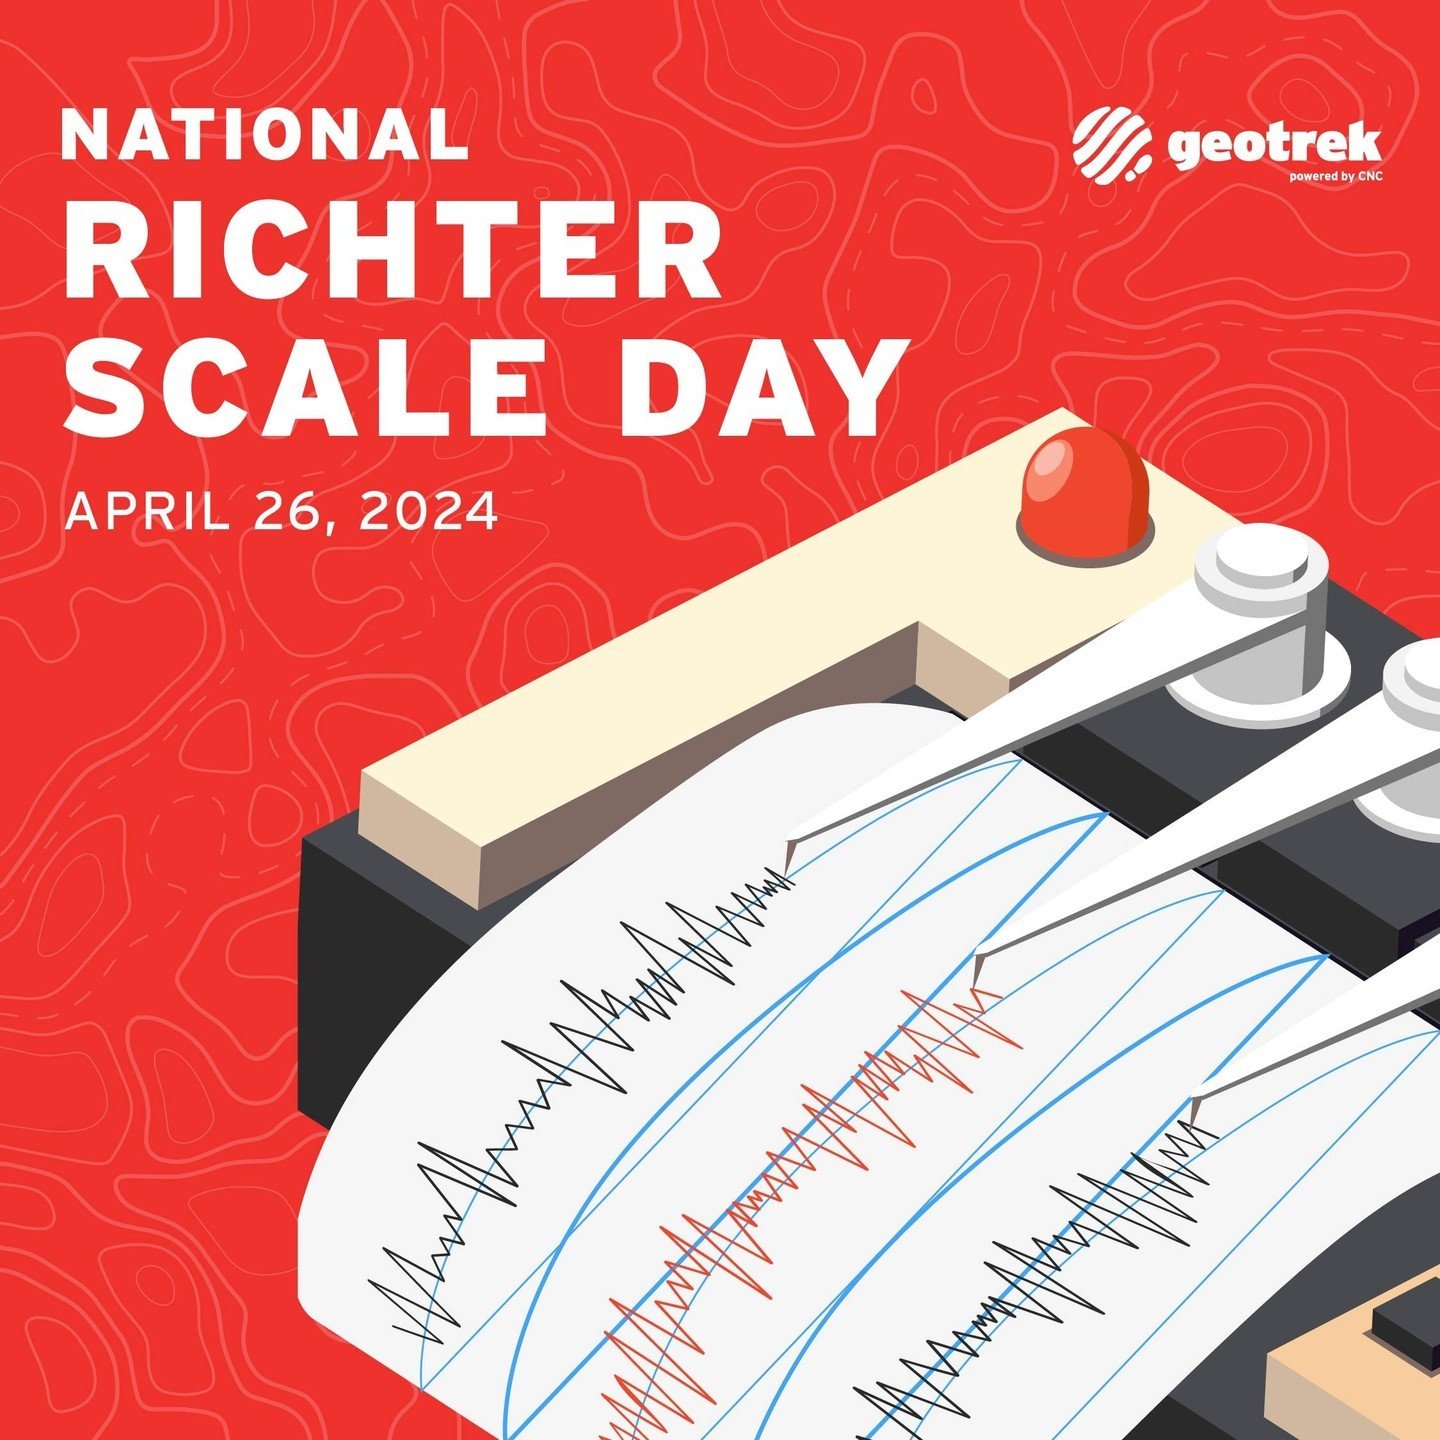 The Richter Scale, developed in 1935 by Charles F. Richter, is a logarithmic scale used to quantify the magnitude of earthquakes. By measuring the amplitude of seismic waves recorded by seismographs, the Richter Scale provides a standardized measure 